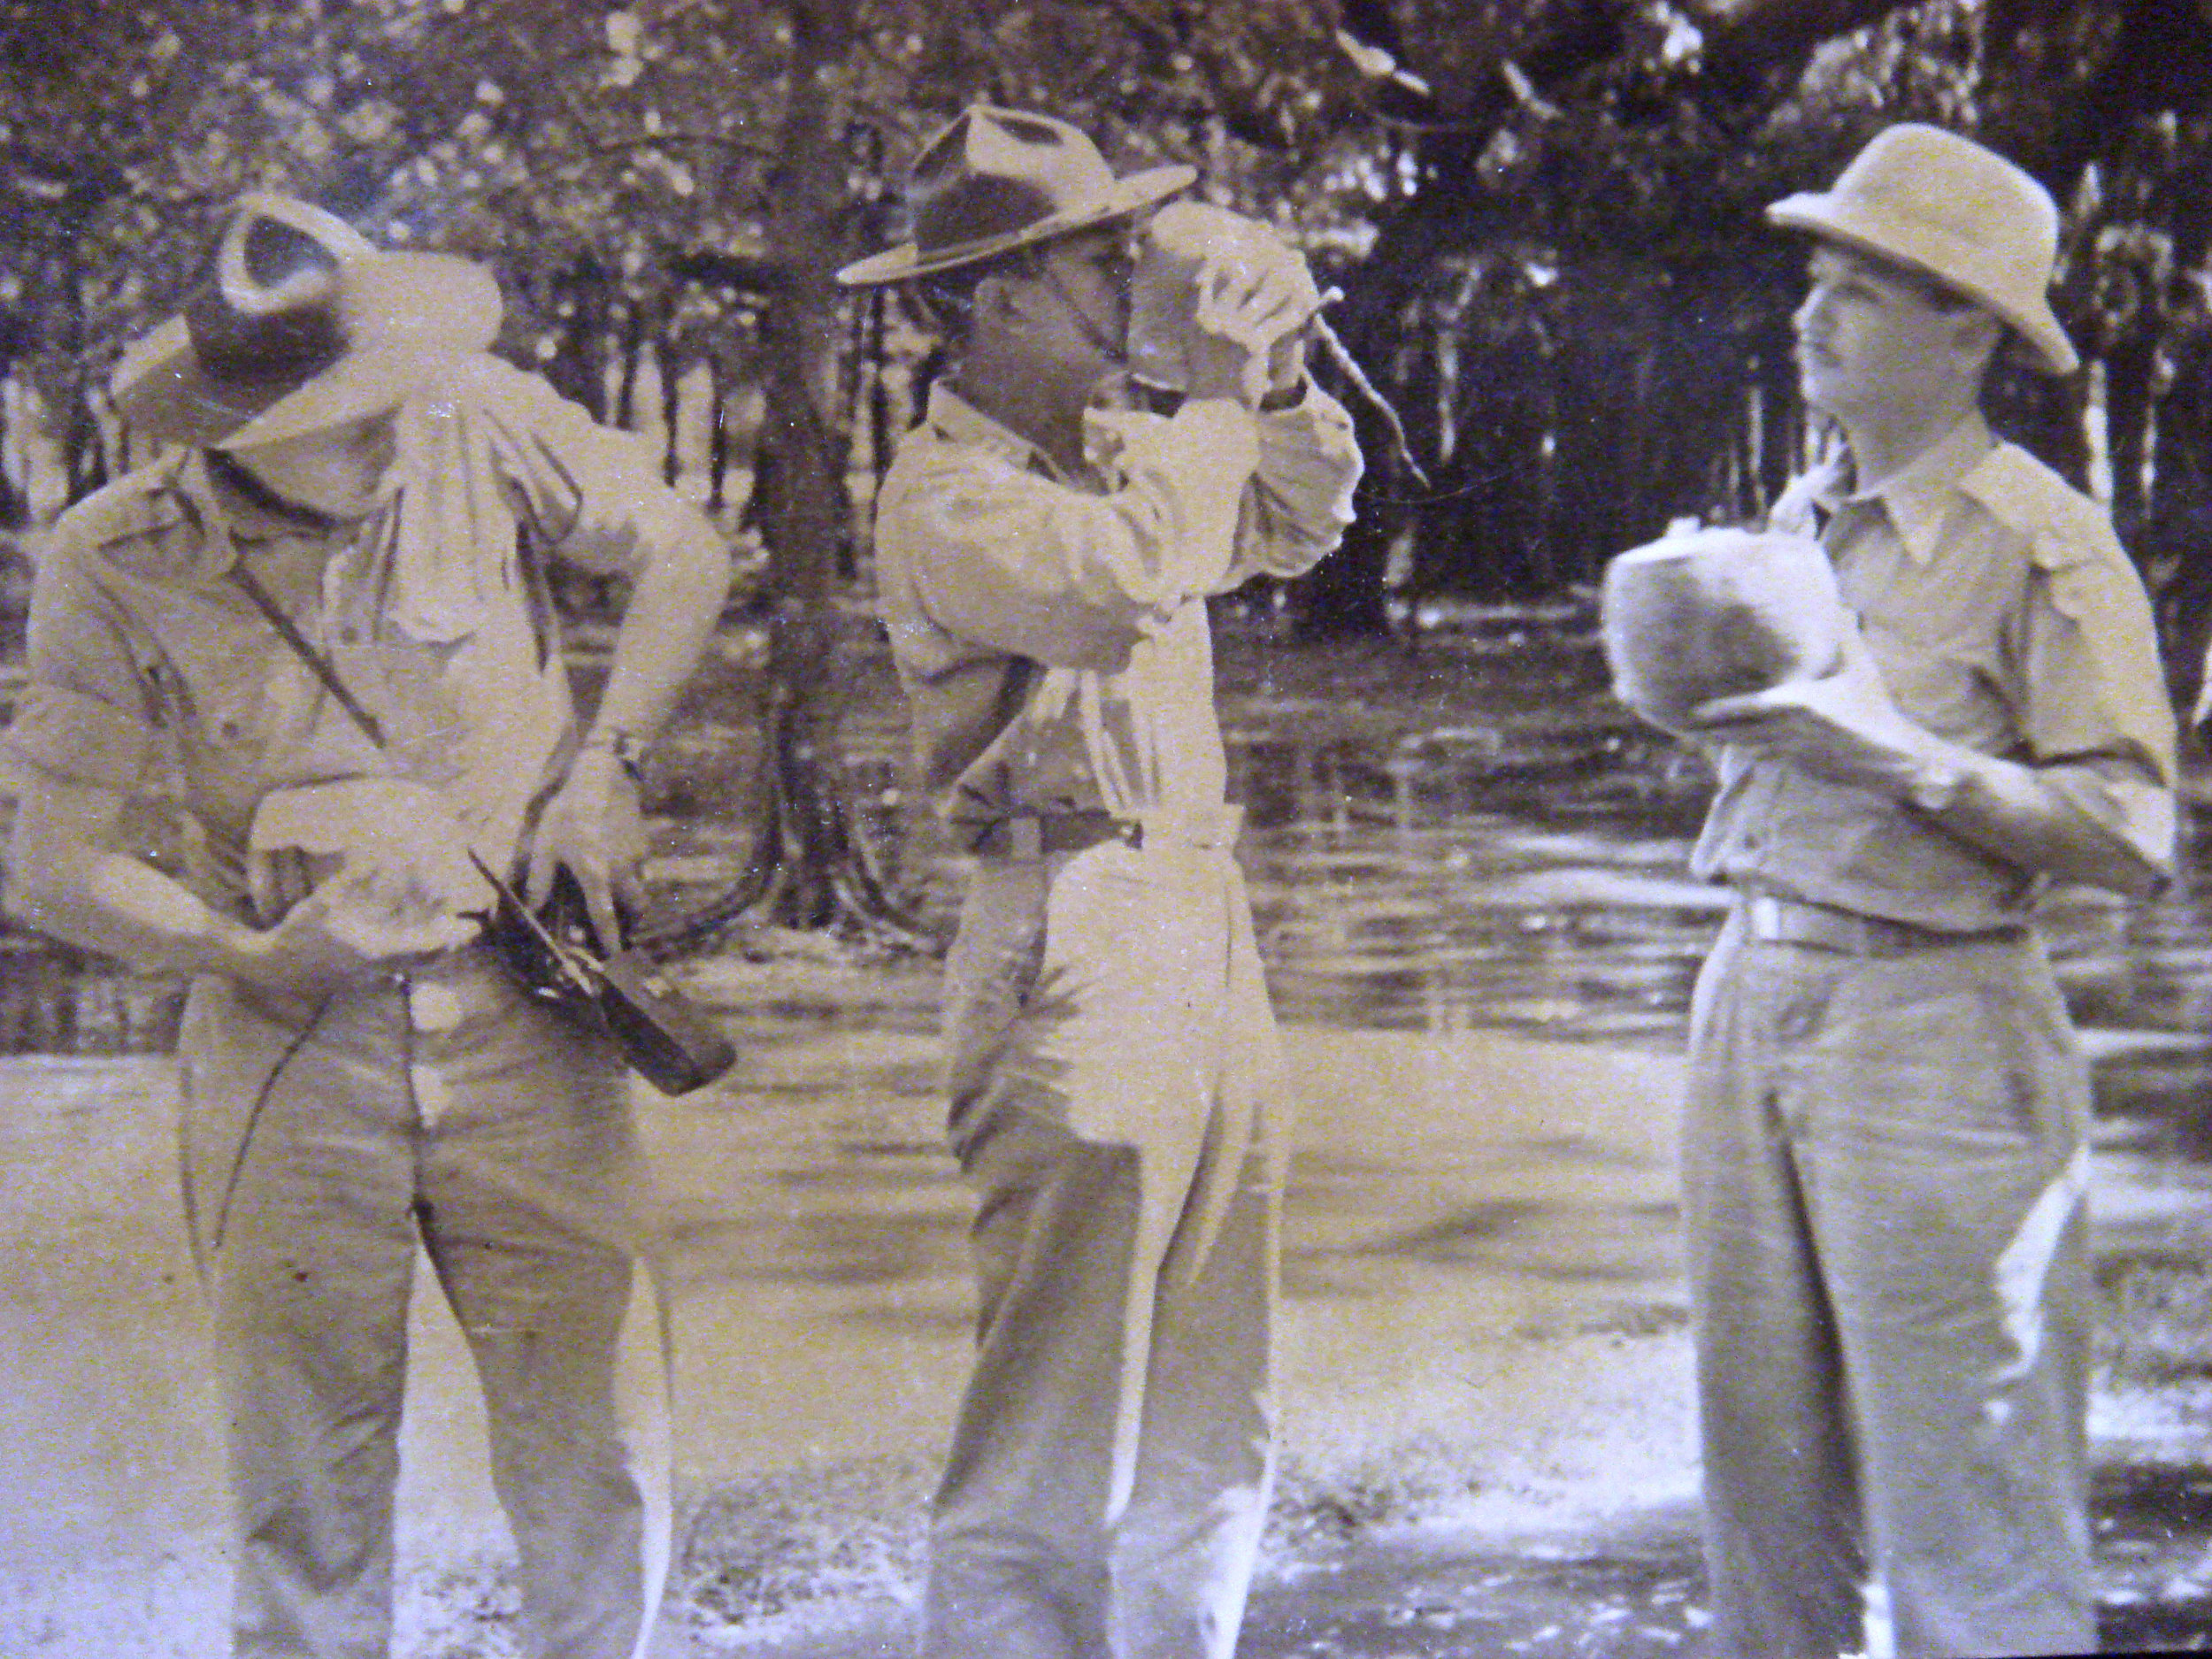 Drinking coconut water in the Burmese jungle ca. 1944